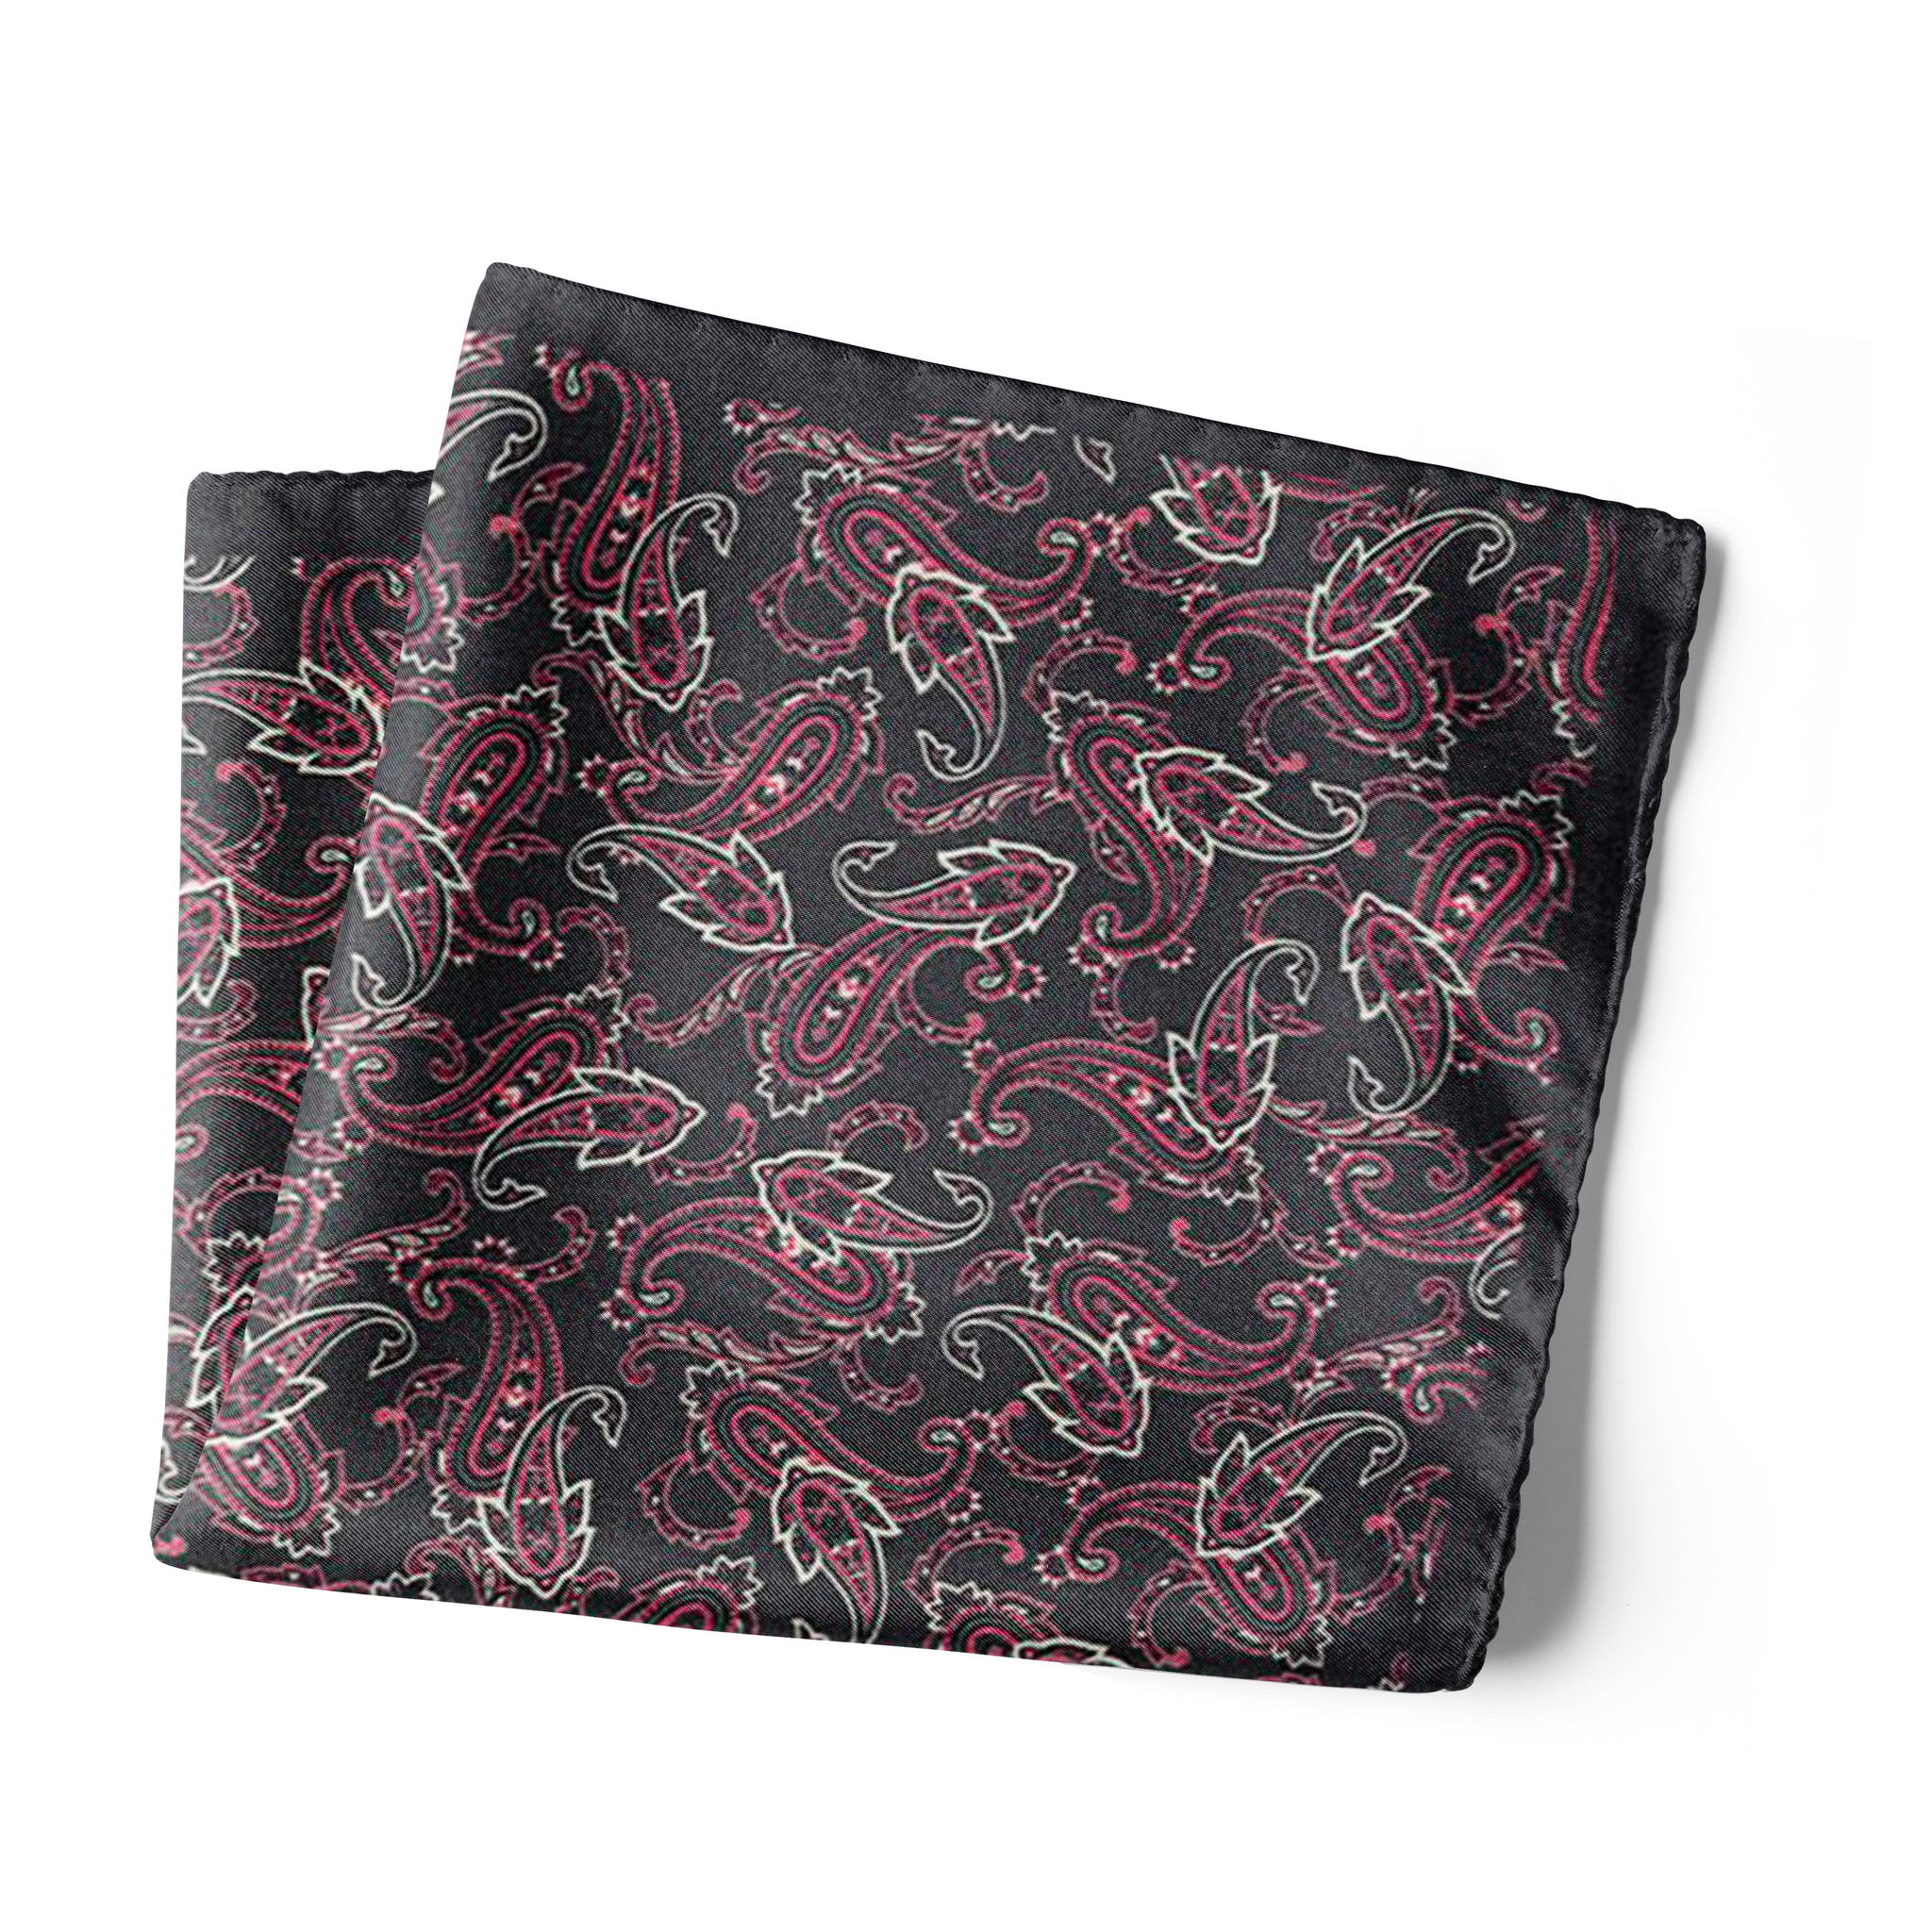 Chokore Black and Rose Pink Silk Pocket Square from Indian at Heart collection